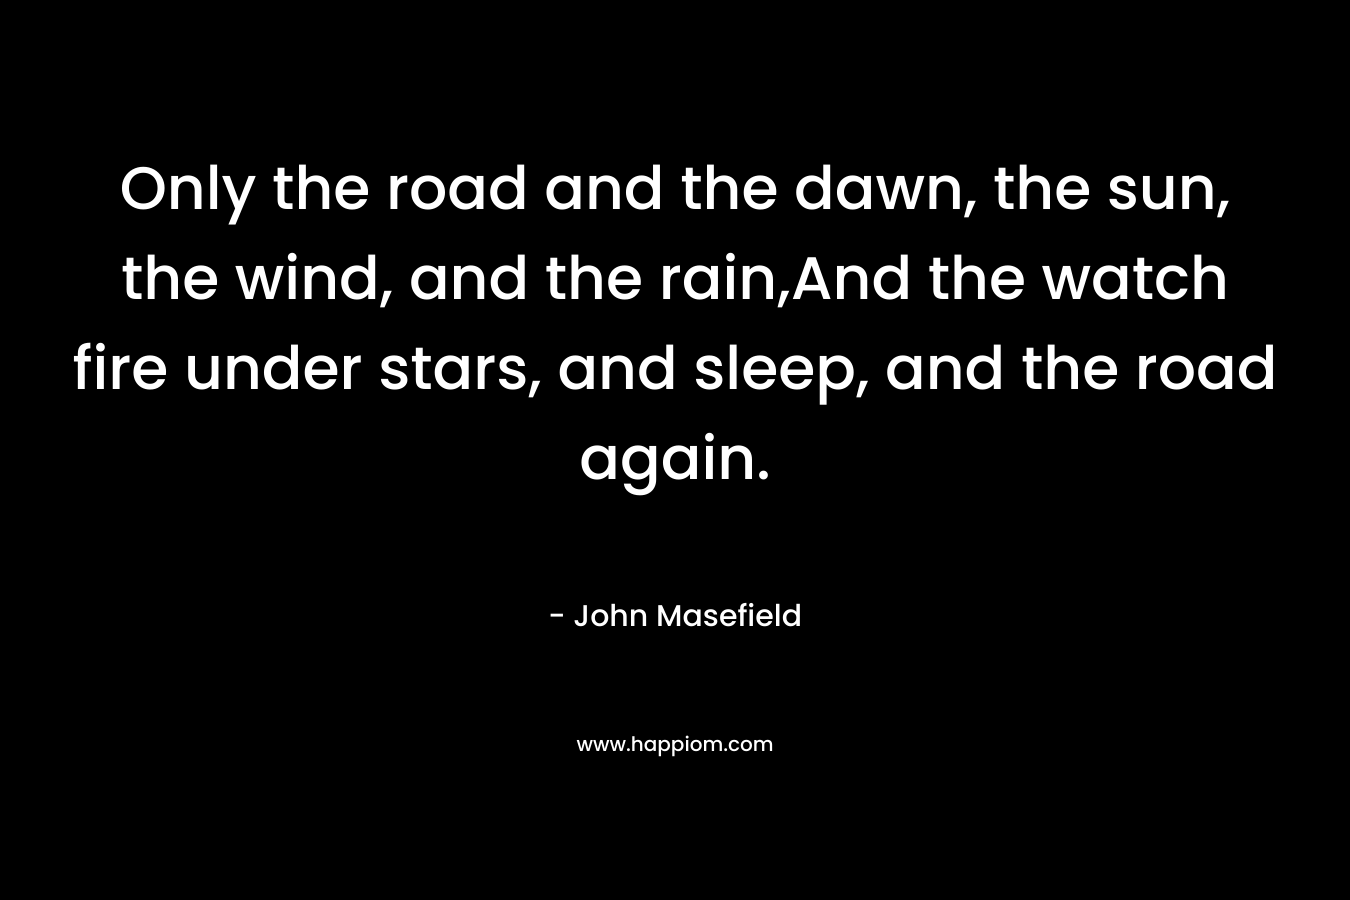 Only the road and the dawn, the sun, the wind, and the rain,And the watch fire under stars, and sleep, and the road again. – John Masefield